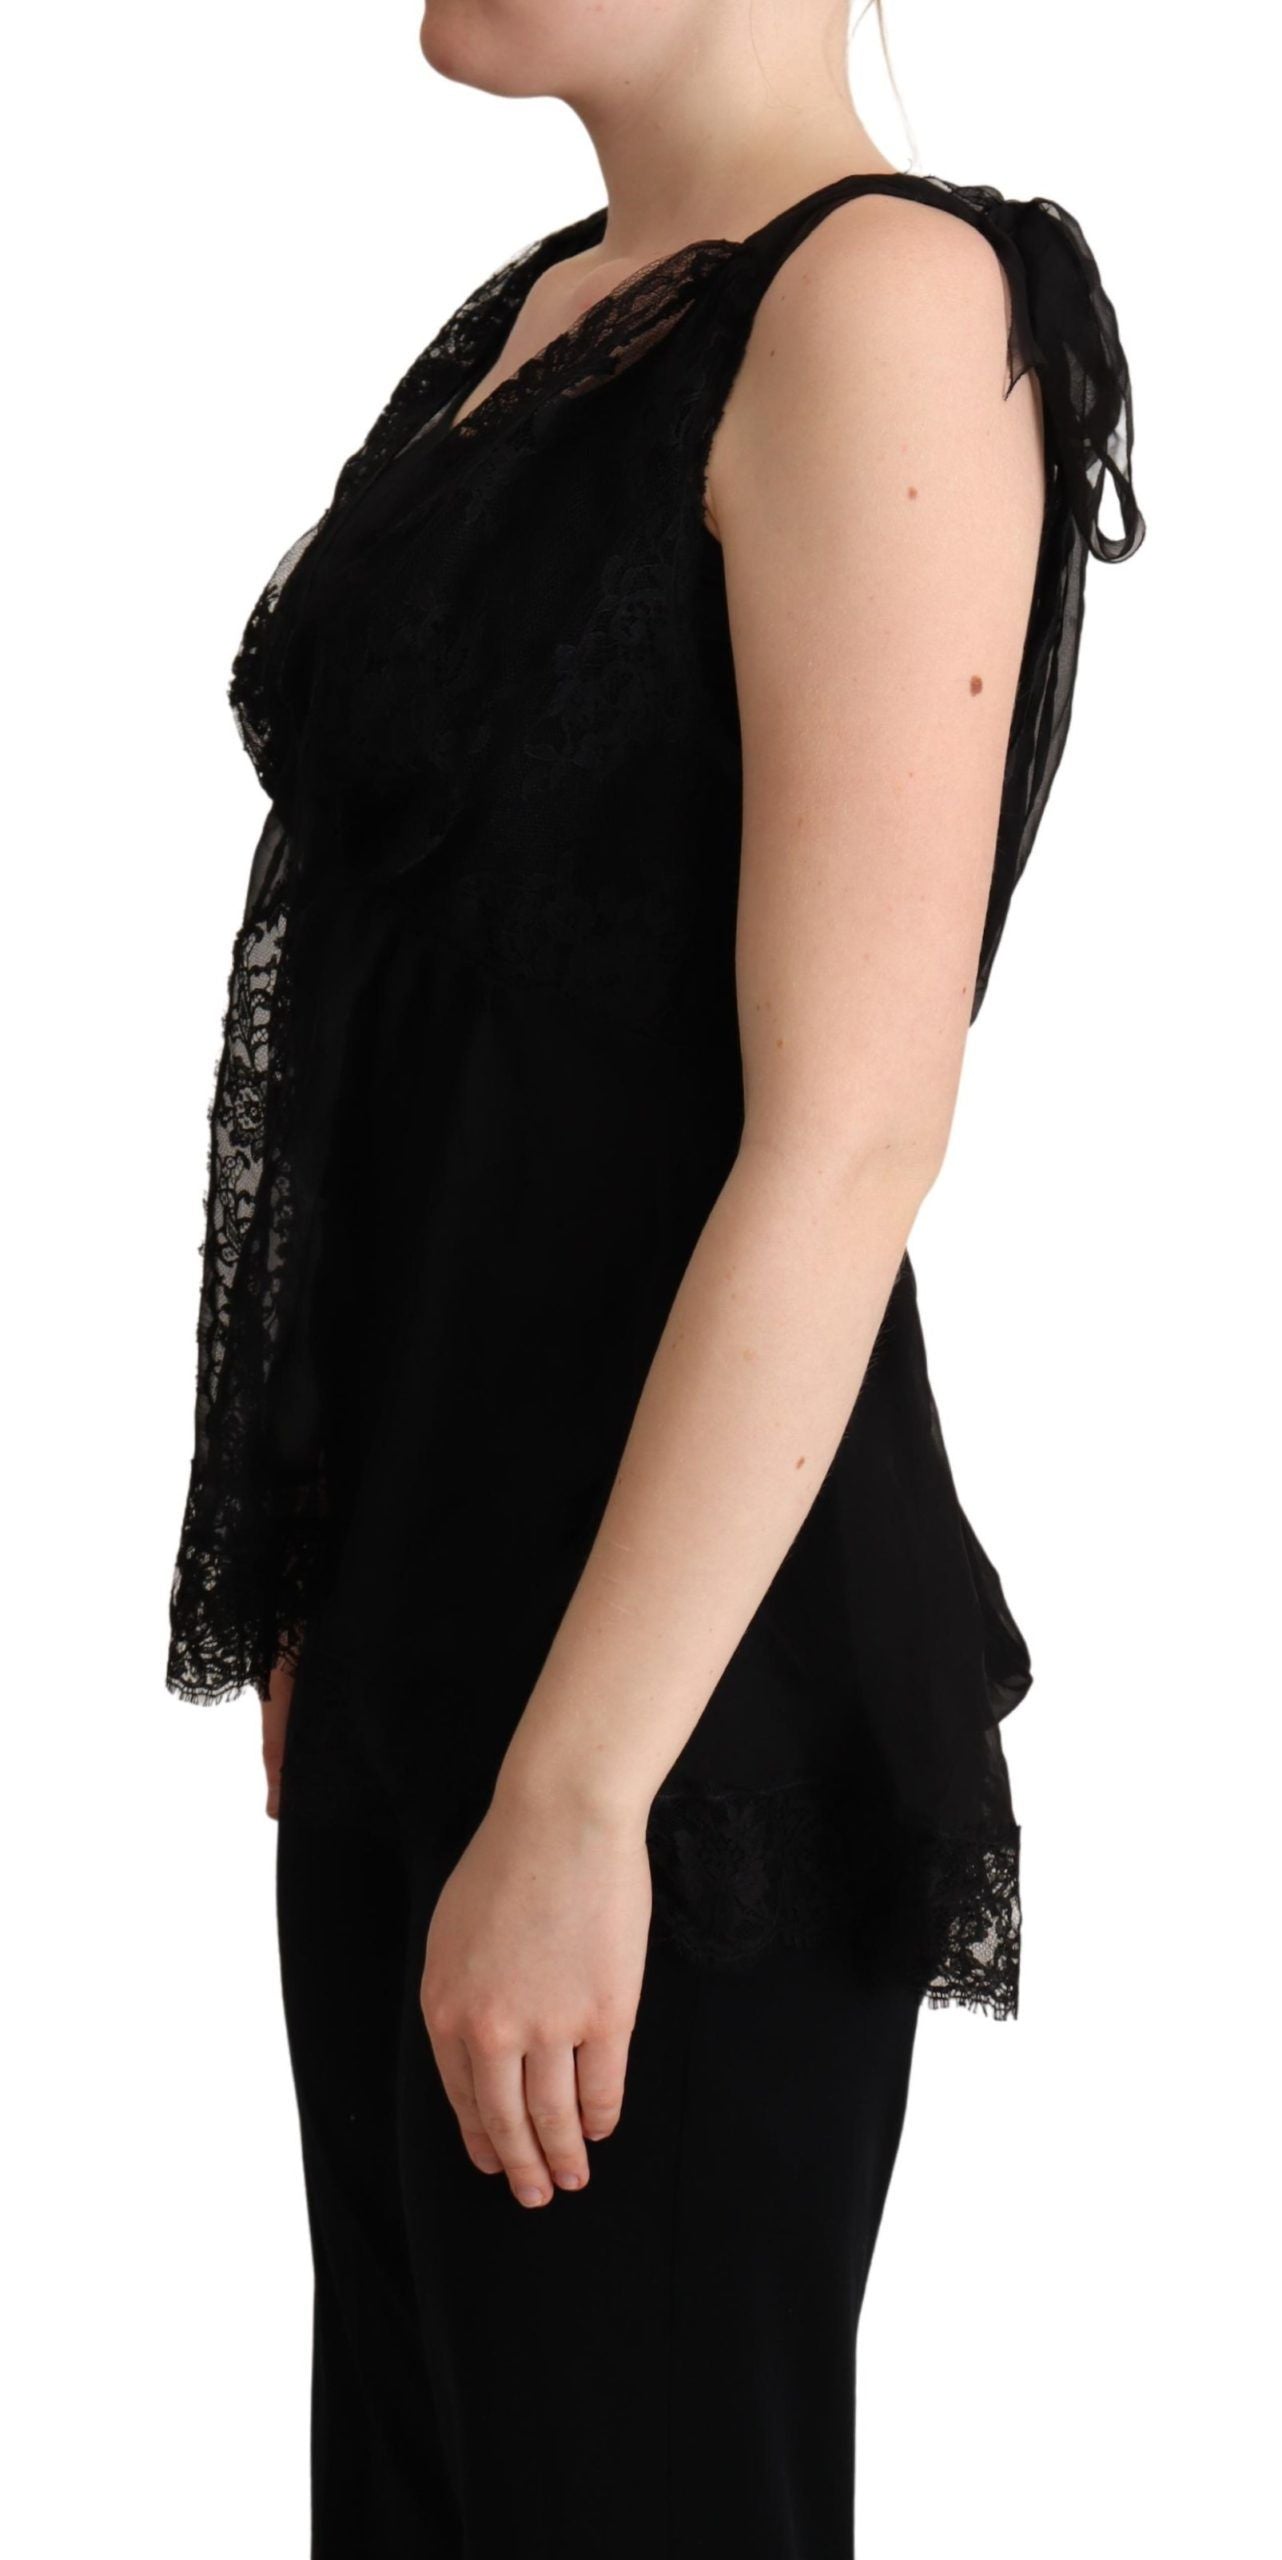 Black Silk Lace Trim Camisole Tank Top - Designed by Dolce & Gabbana Available to Buy at a Discounted Price on Moon Behind The Hill Online Designer Discount Store